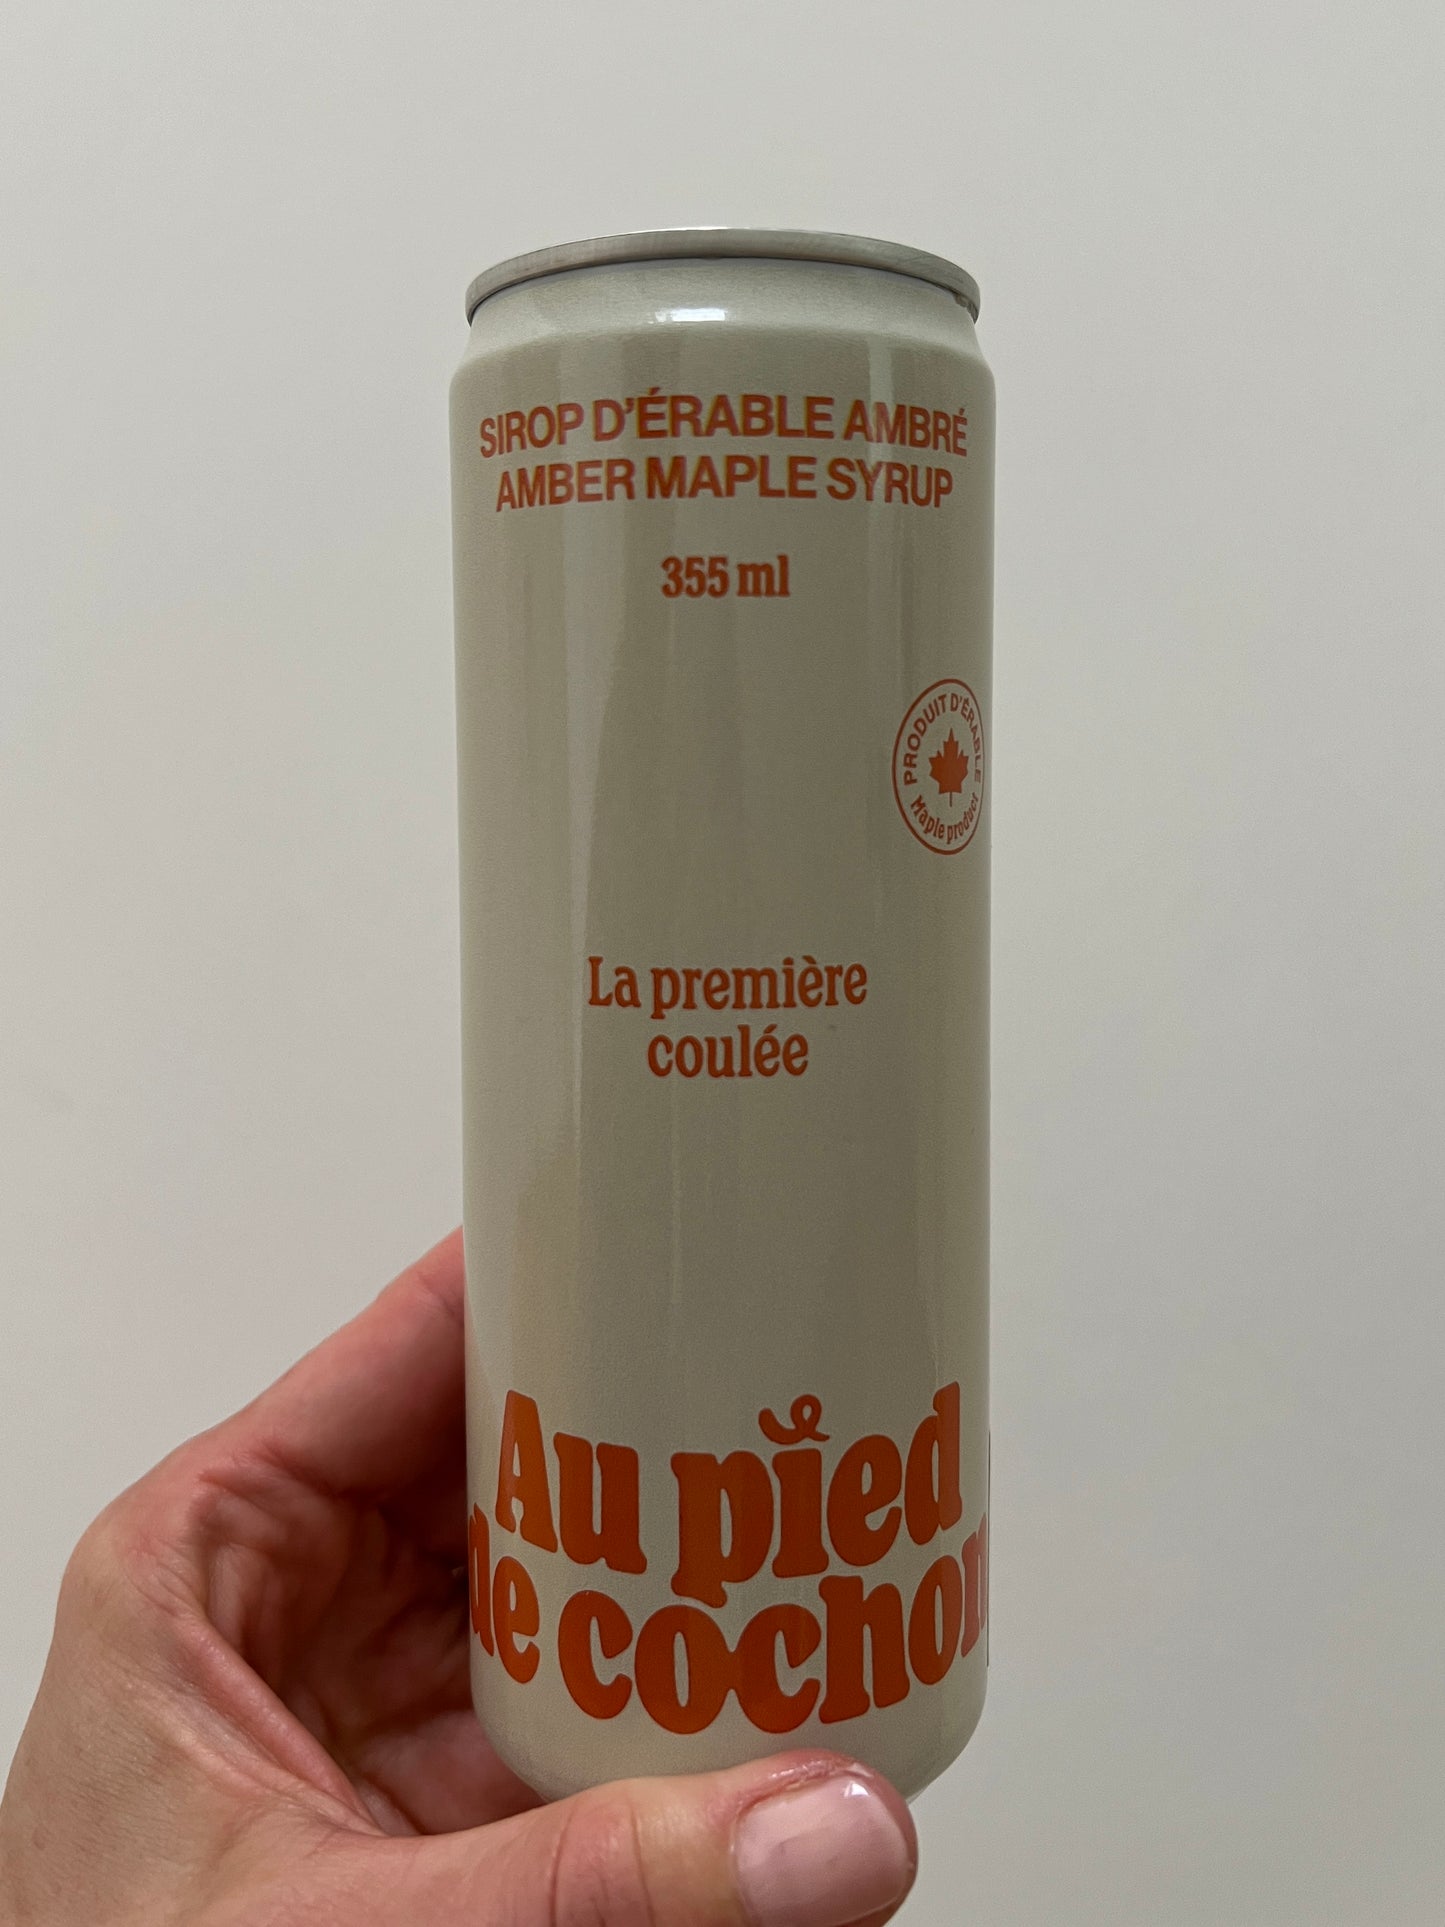 maple syrup - 355ml - amber or dark